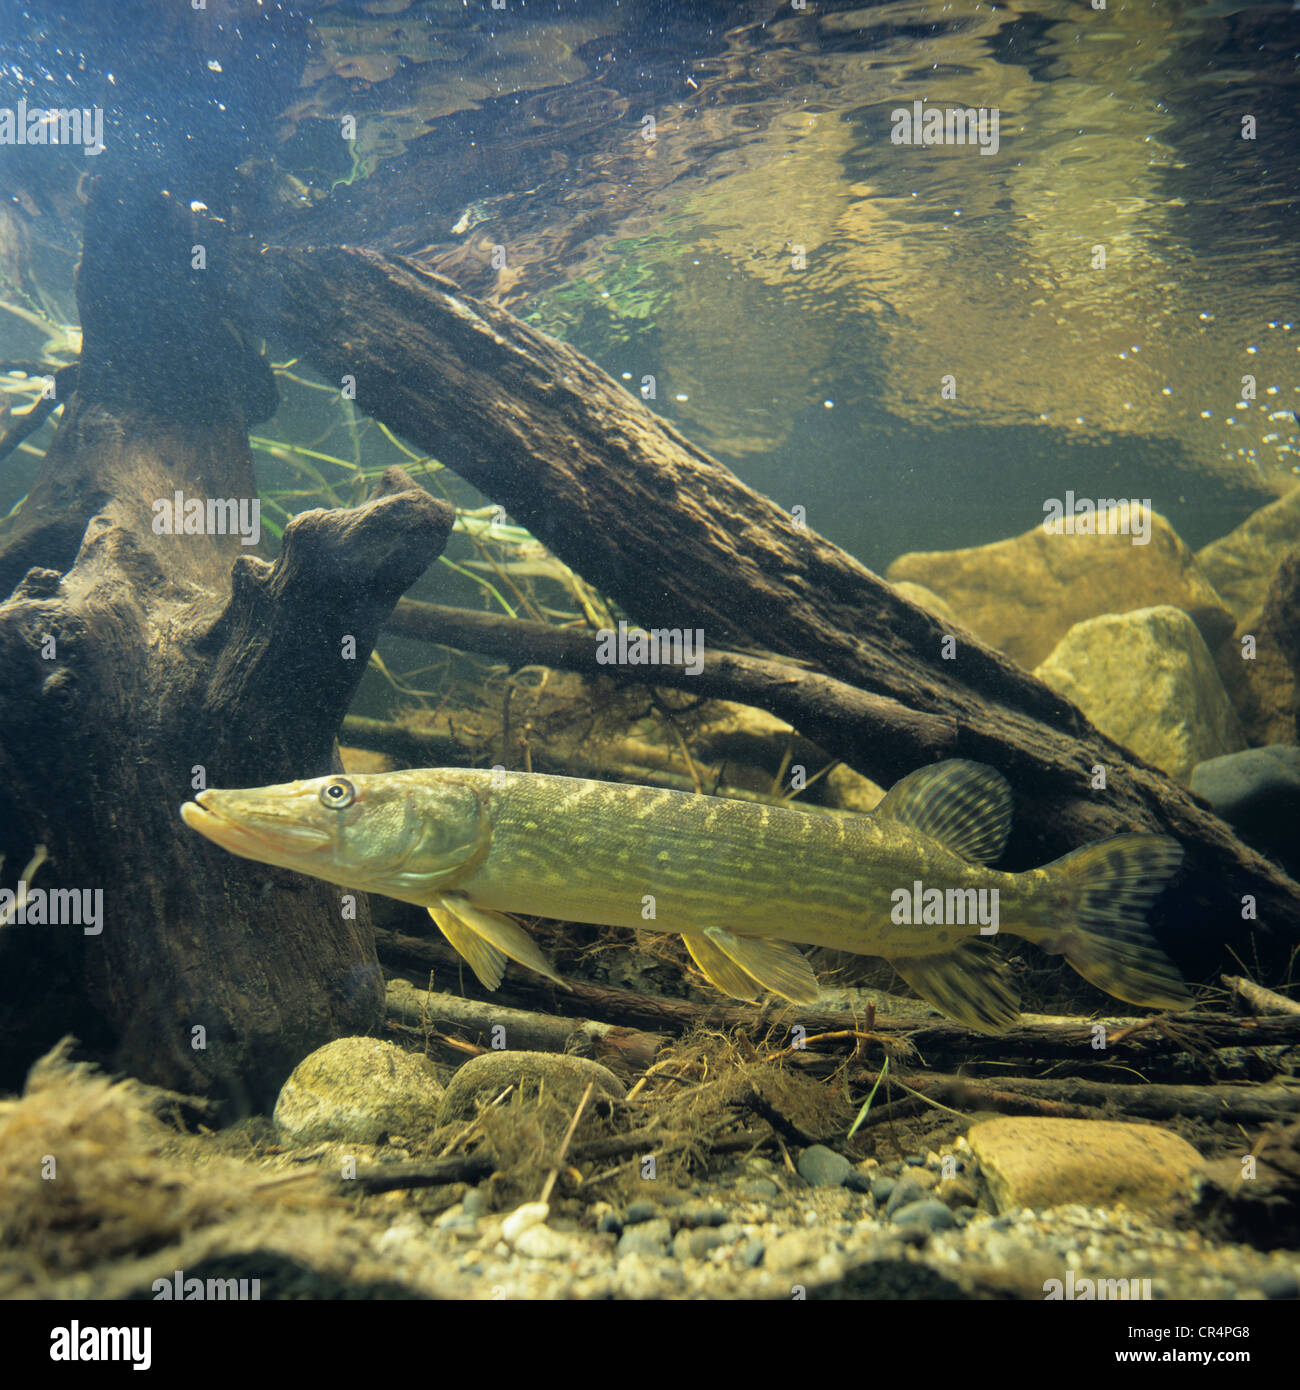 Northern pike (Esox lucius) Stock Photo